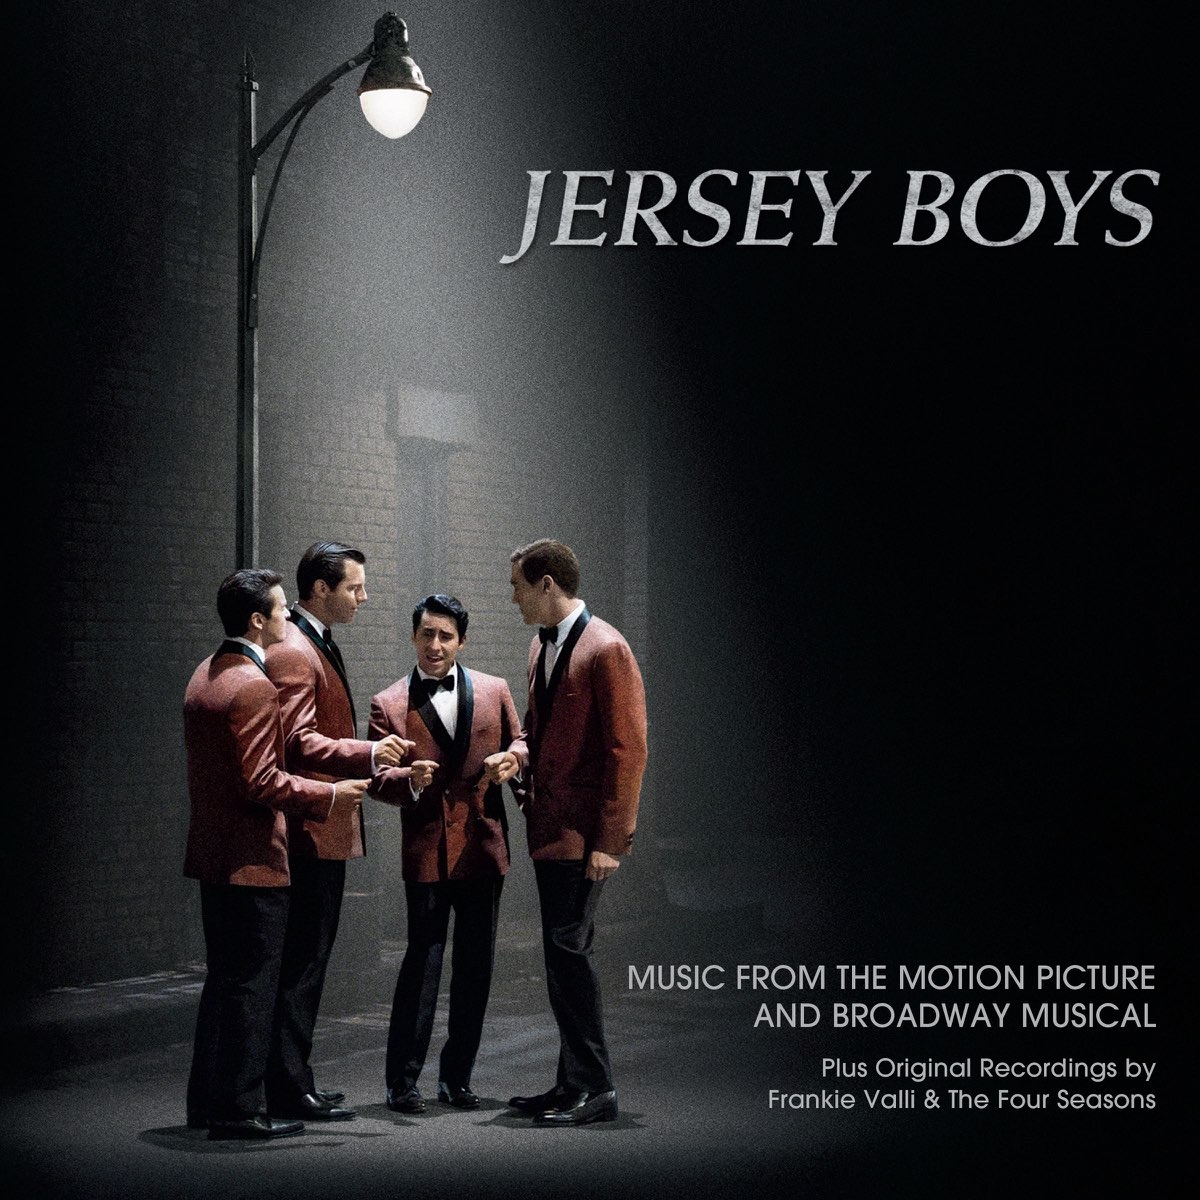 Jersey Boys (Music From the Motion Picture and Broadway Musical) by Jersey  Boys on Apple Music